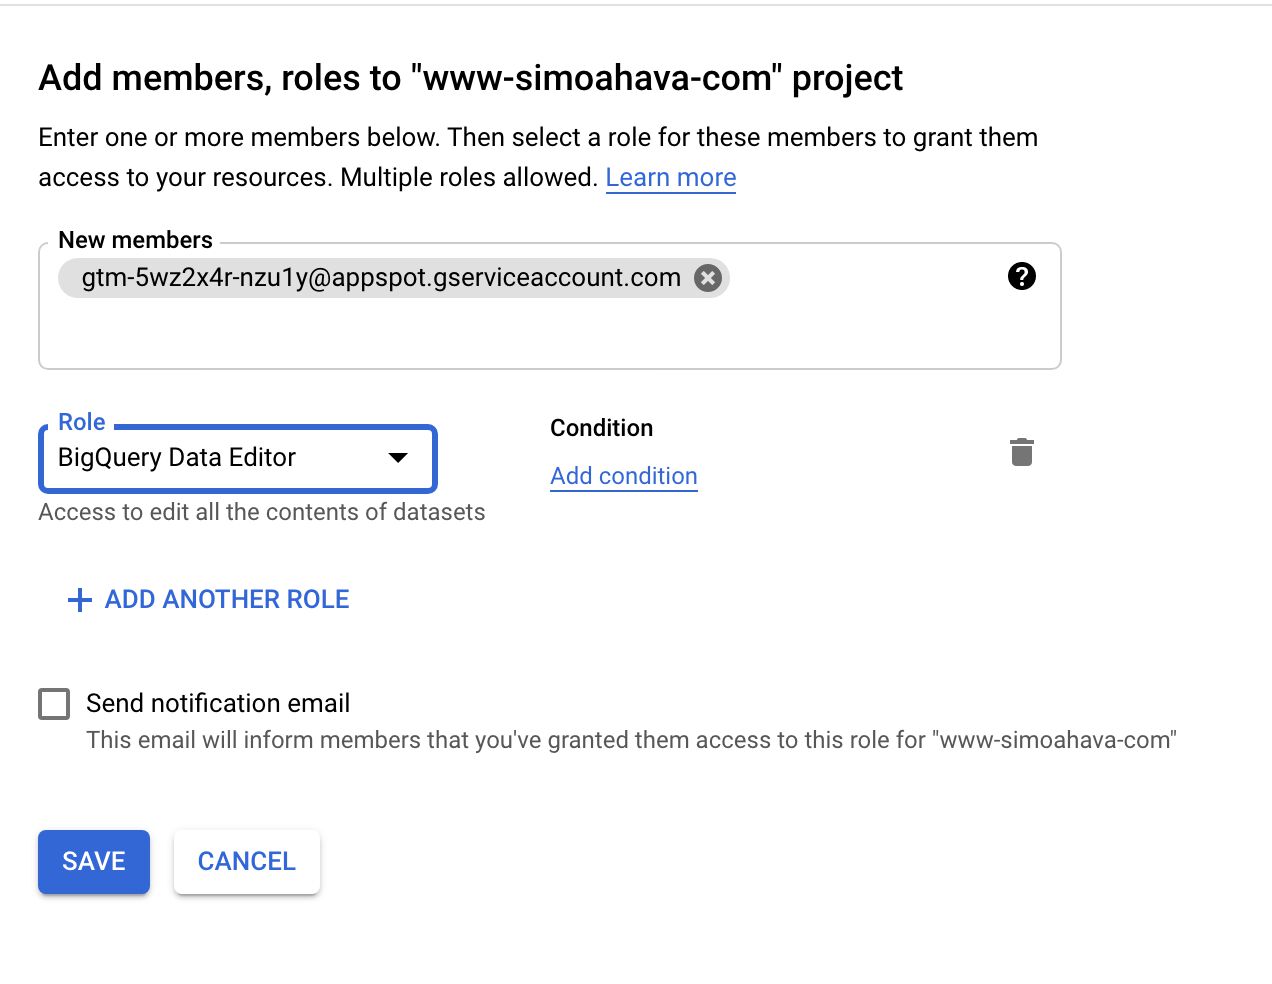 New member creation in the project with the BigQuery table.